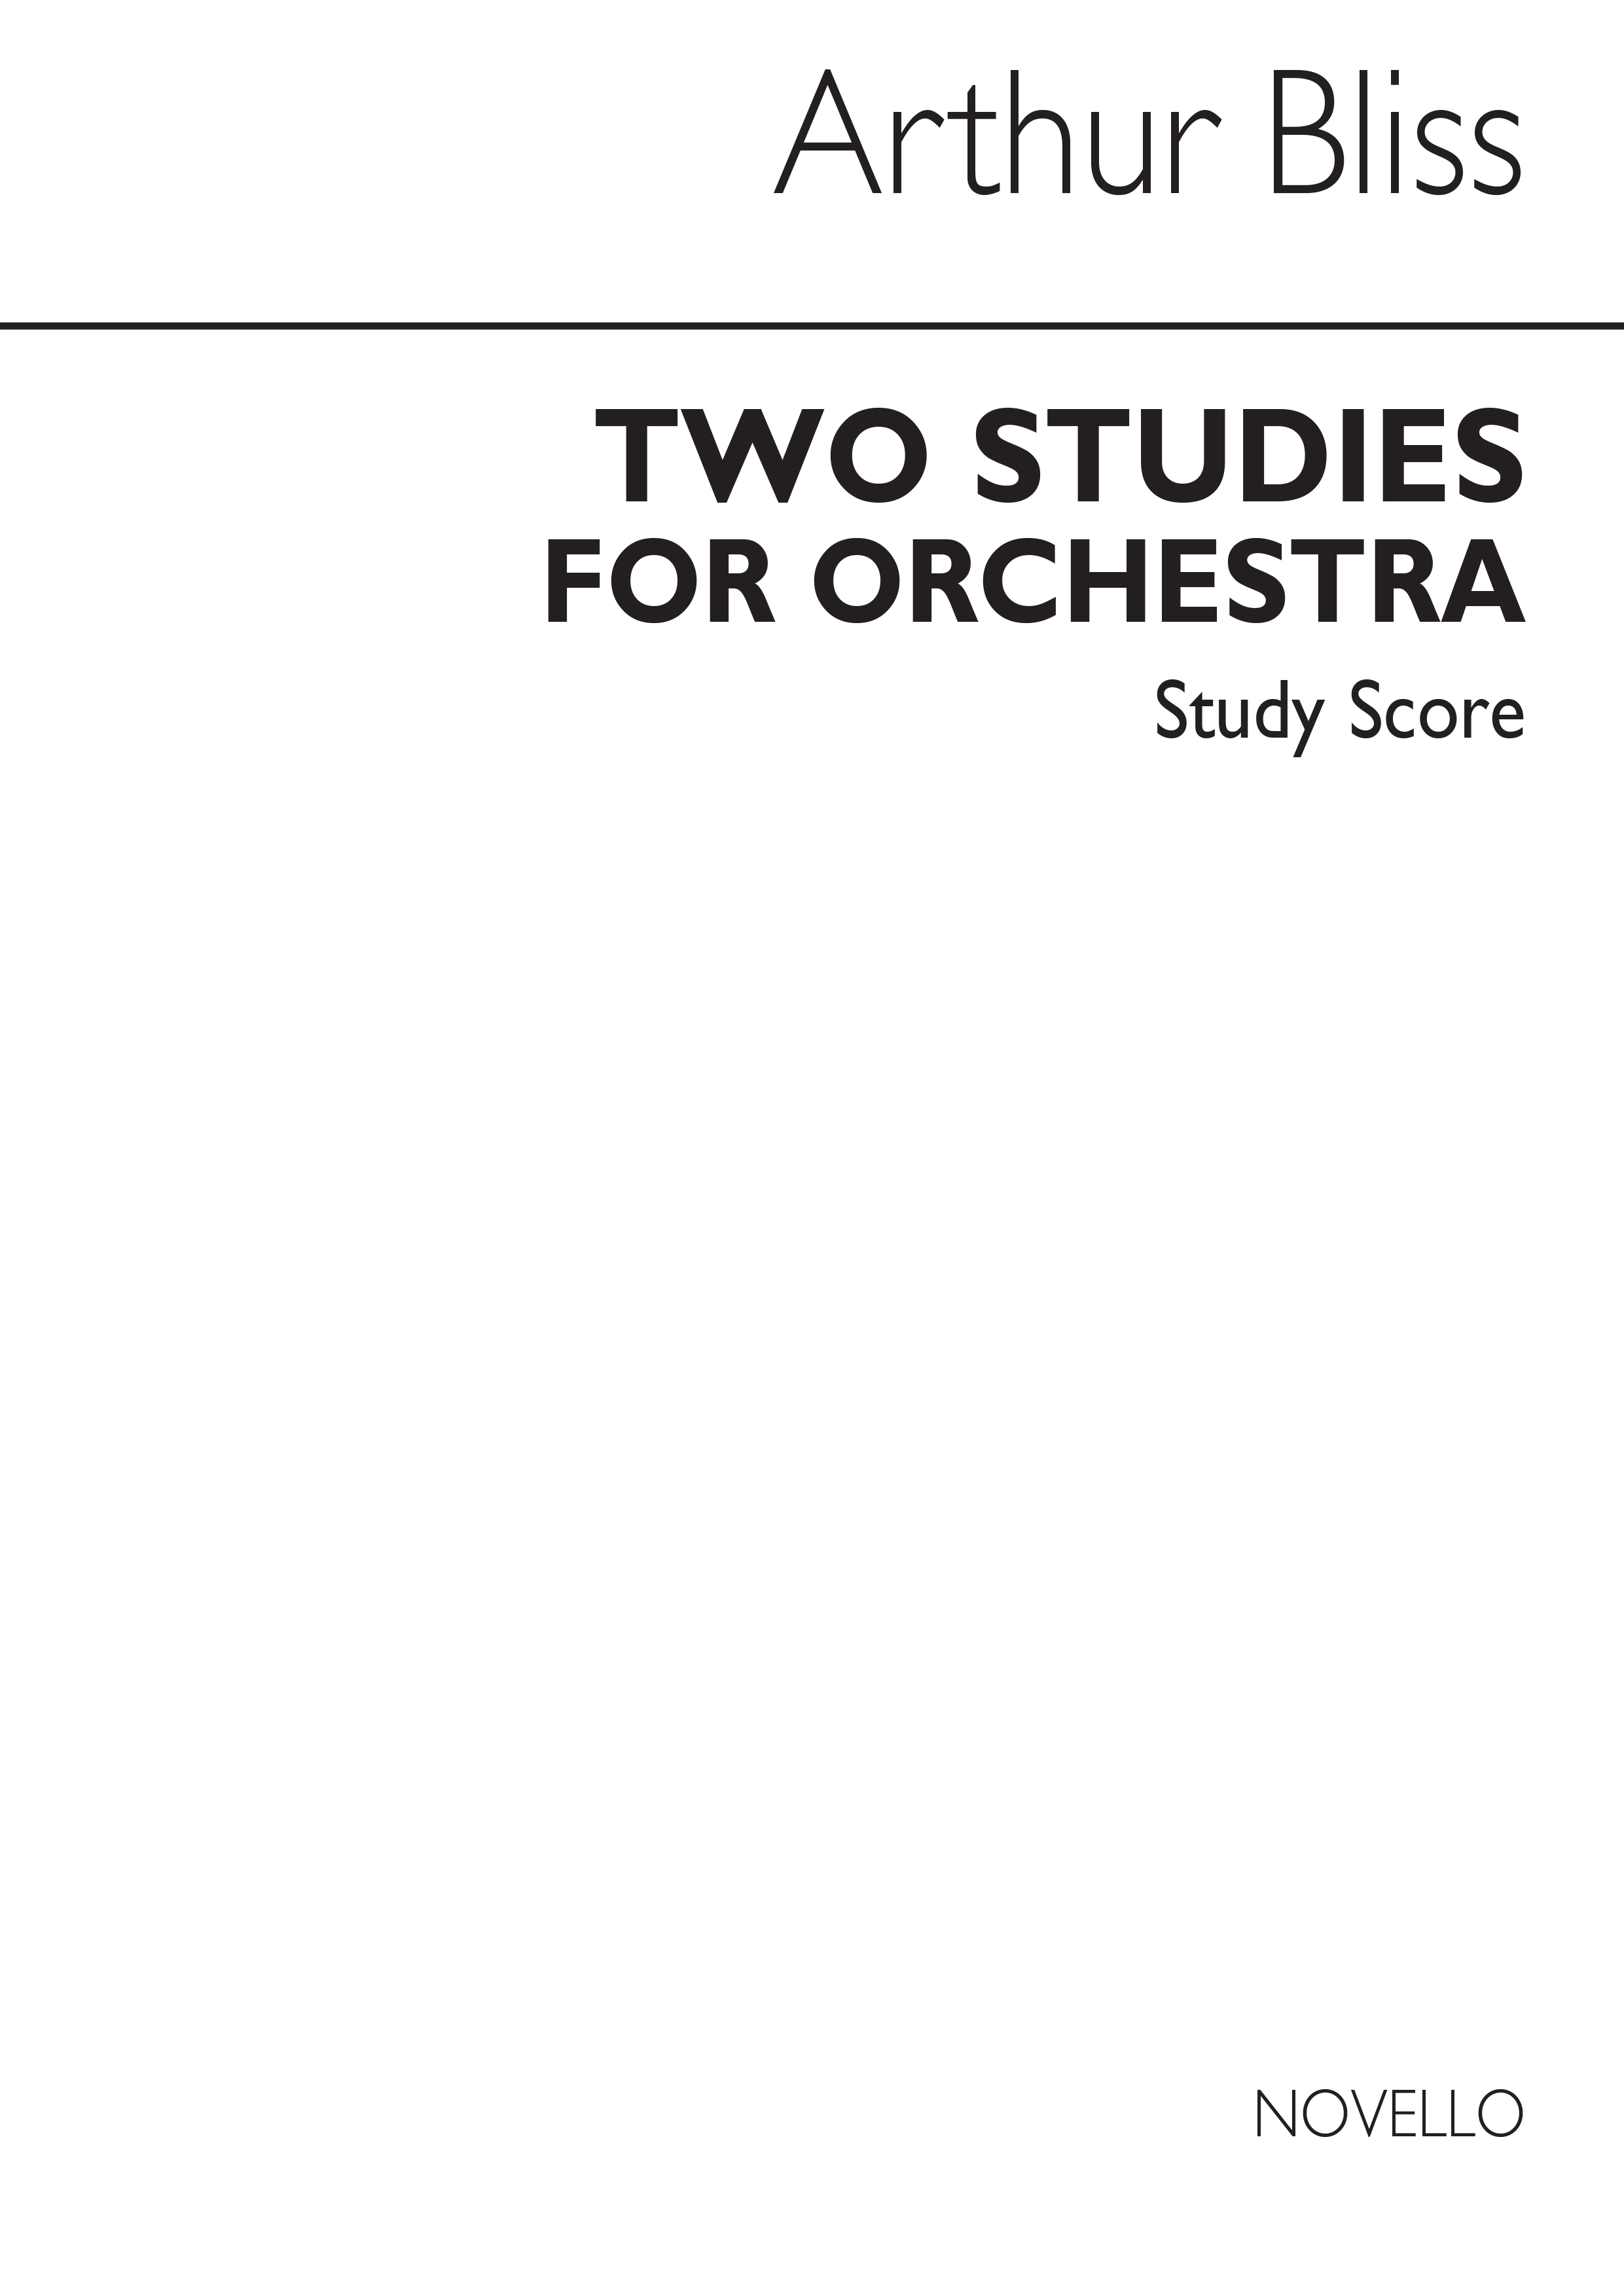 Arthur Bliss: Arthur Bliss Two Studies for Orchestra: Orchestra: Study